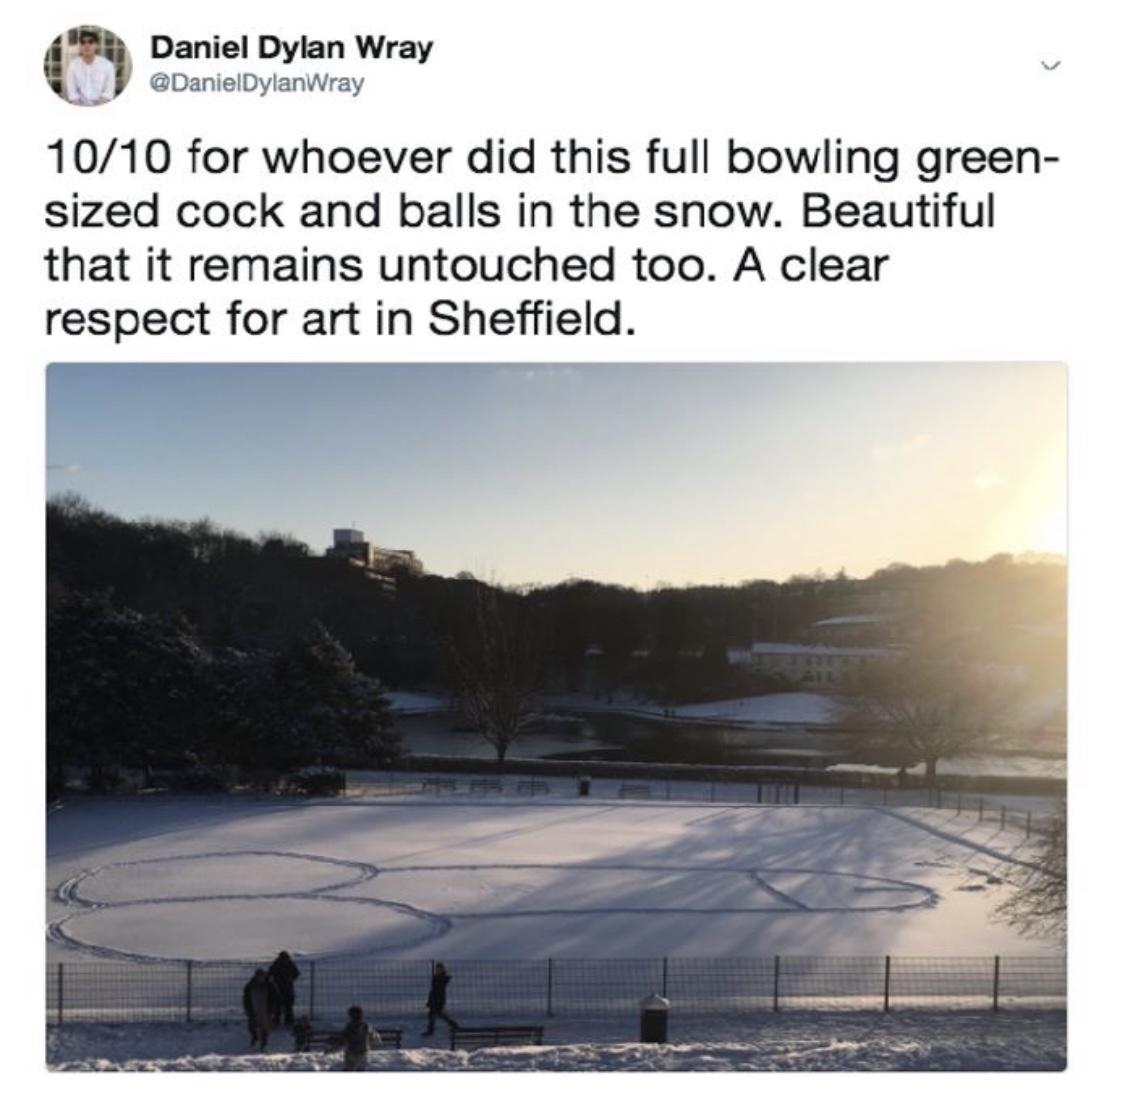 water resources - Daniel Dylan Wray 1010 for whoever did this full bowling green sized cock and balls in the snow. Beautiful that it remains untouched too. A clear respect for art in Sheffield.